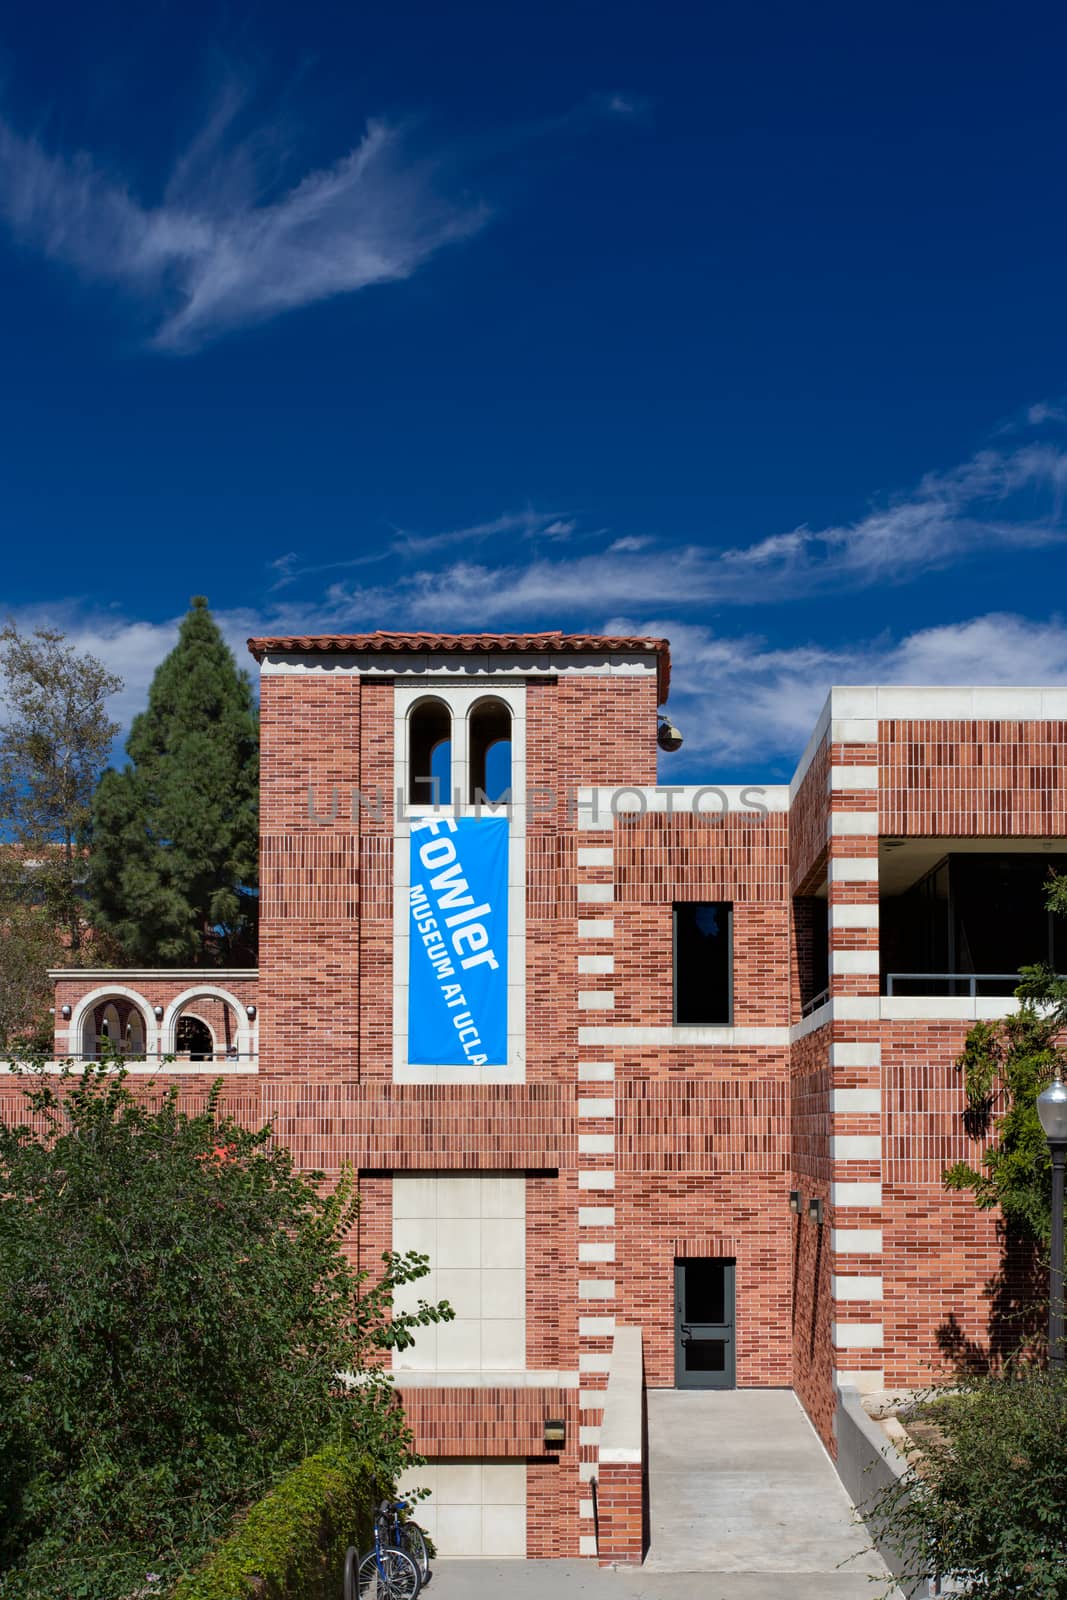 LOS ANGELES, CA/USA - OCTOBER 4, 2014: Fowler Museum on the campus of UCLA. UCLA is a public research university located in the Westwood neighborhood of Los Angeles, California, United States.